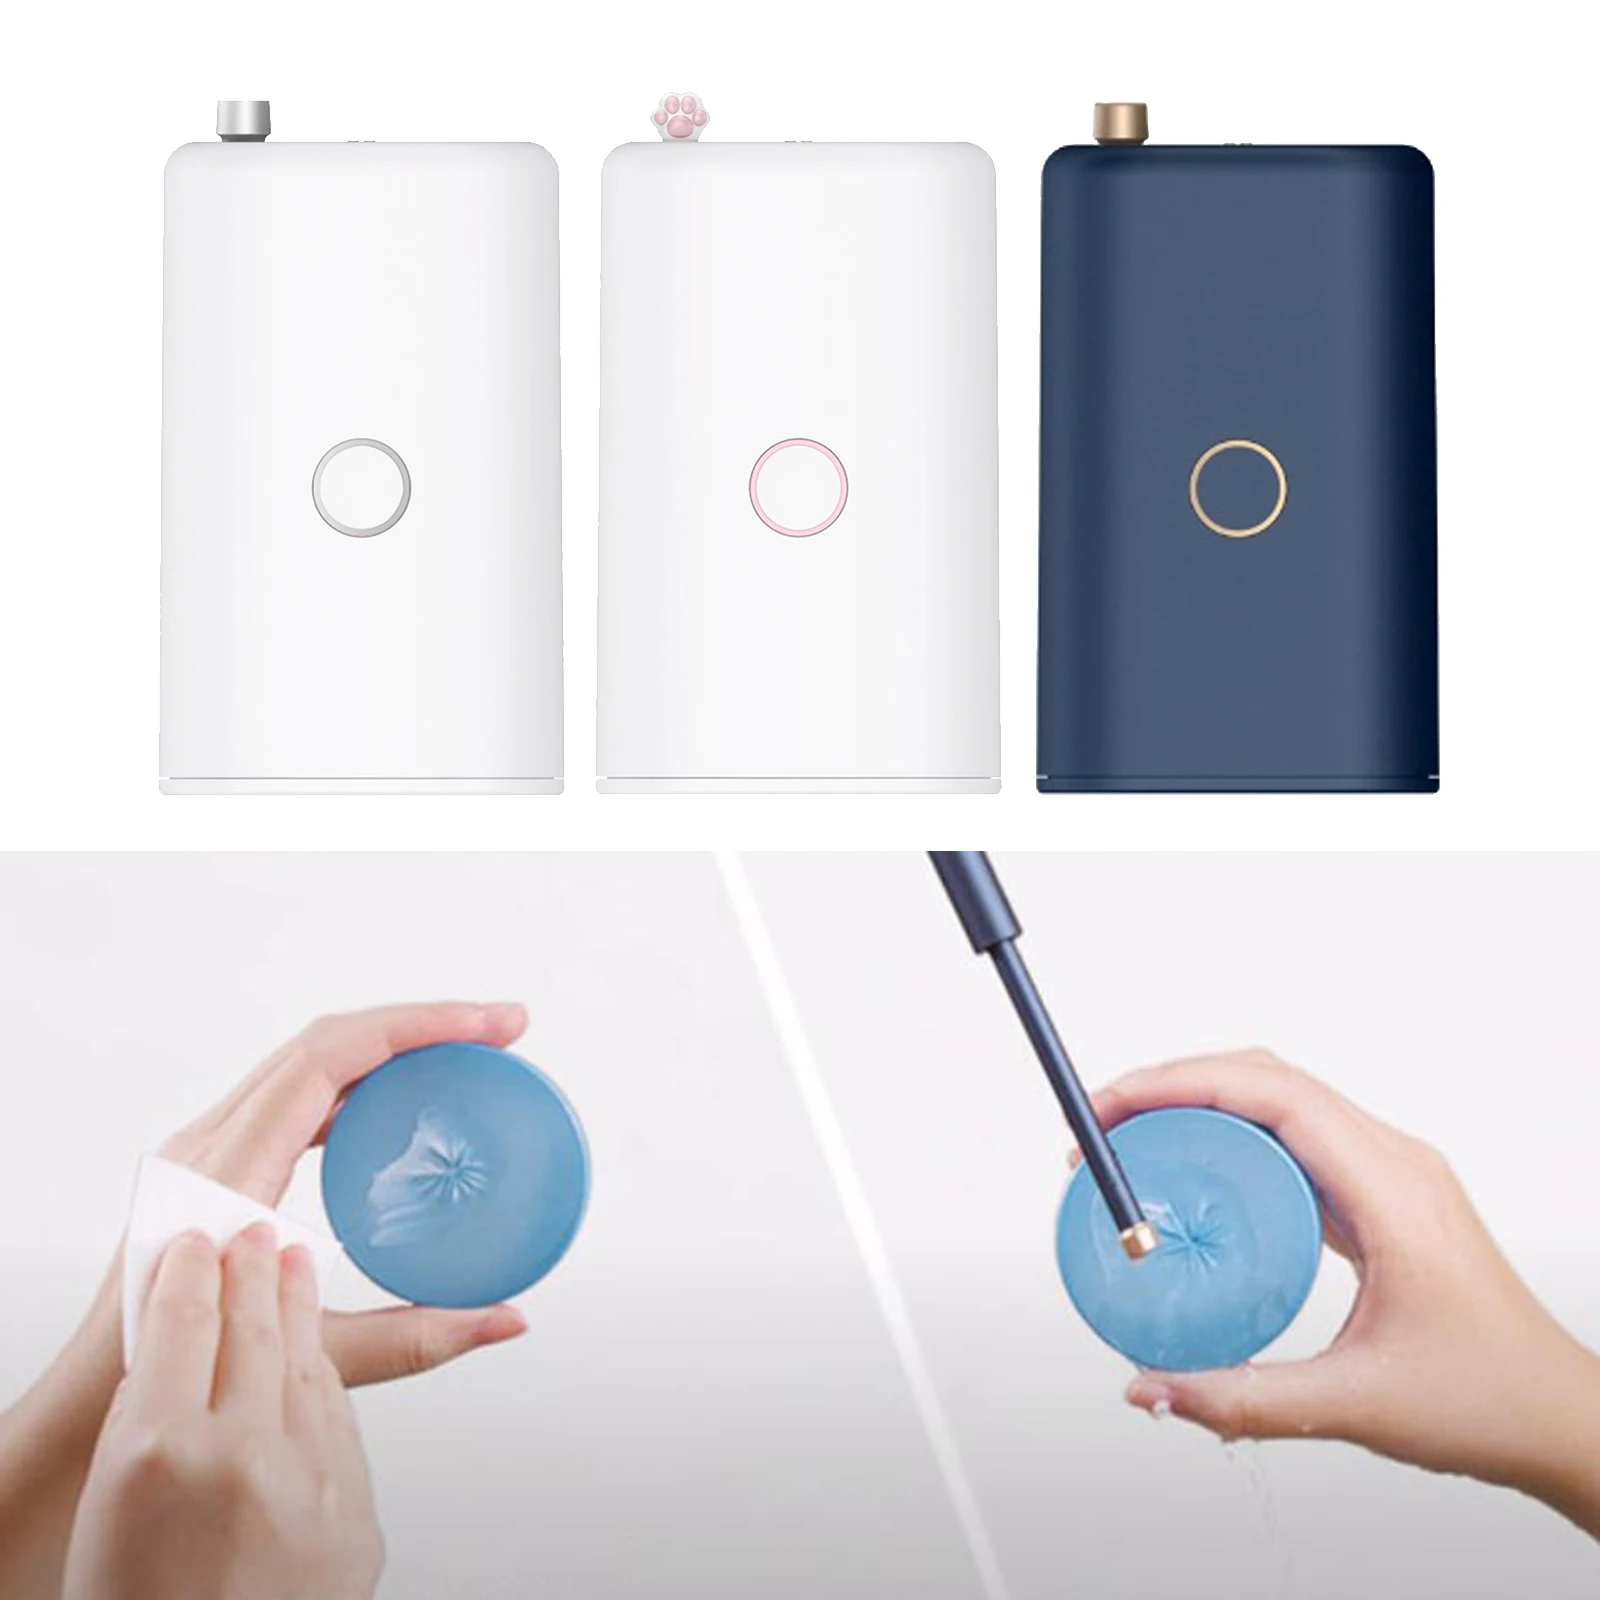 Rechargeable Portable Buttocks Cleaner for Wound Cleaning Waterproof Decent Maternal Vulva Bidet Electric Auto Watering